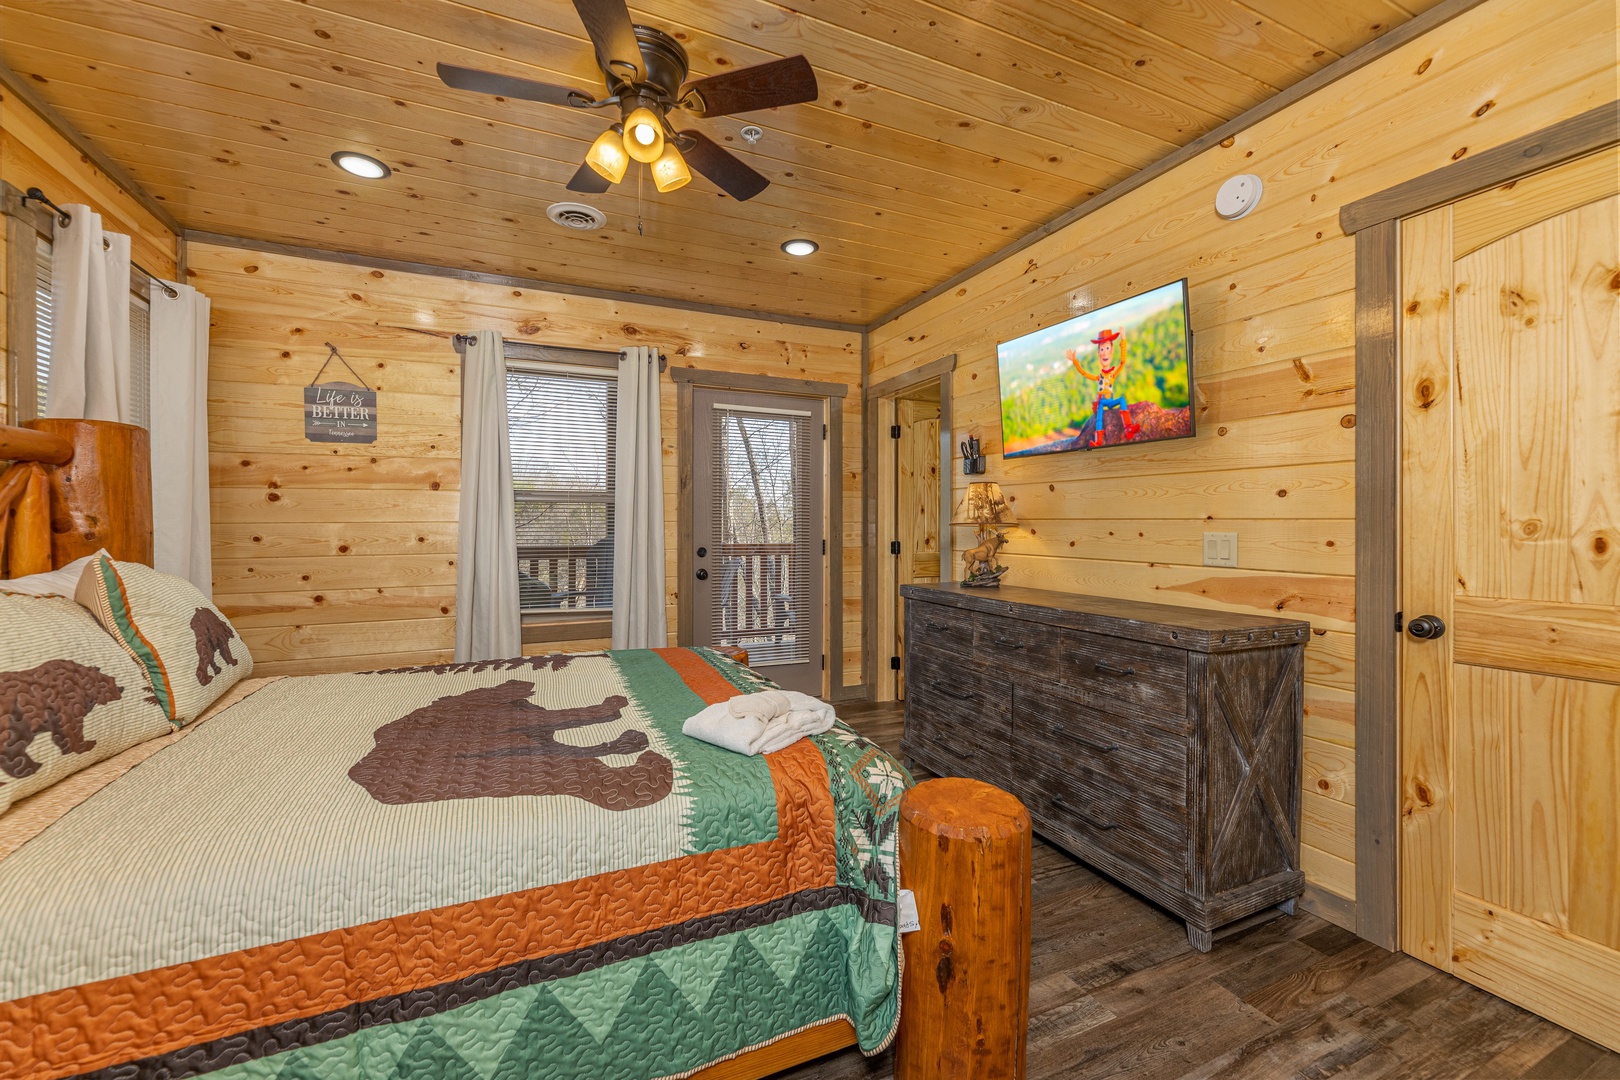 Dresser, second TV, and deck access in a bedroom at Everly's Splash, a 4 bedroom cabin rental located in Pigeon Forge